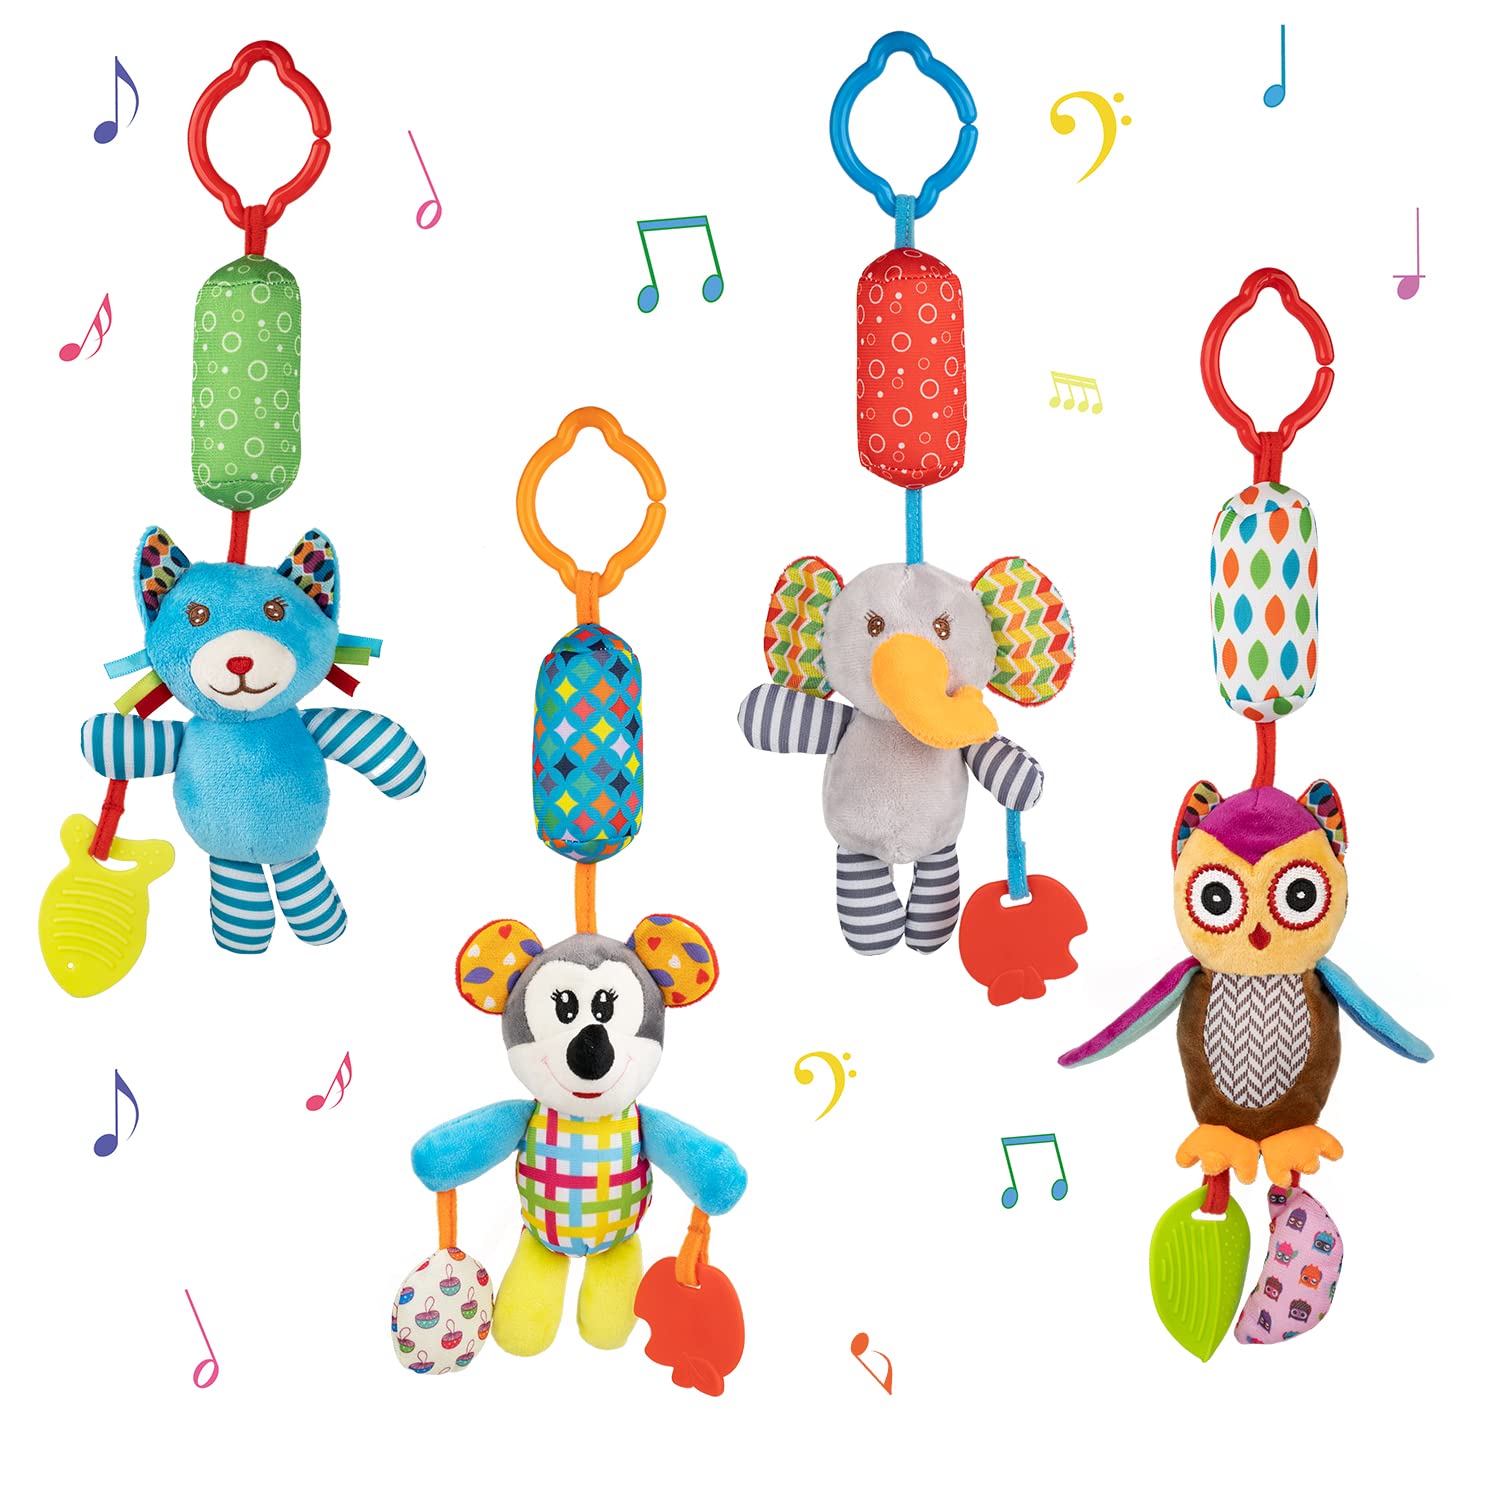 Baby Toys that tinkle and make chiming sounds